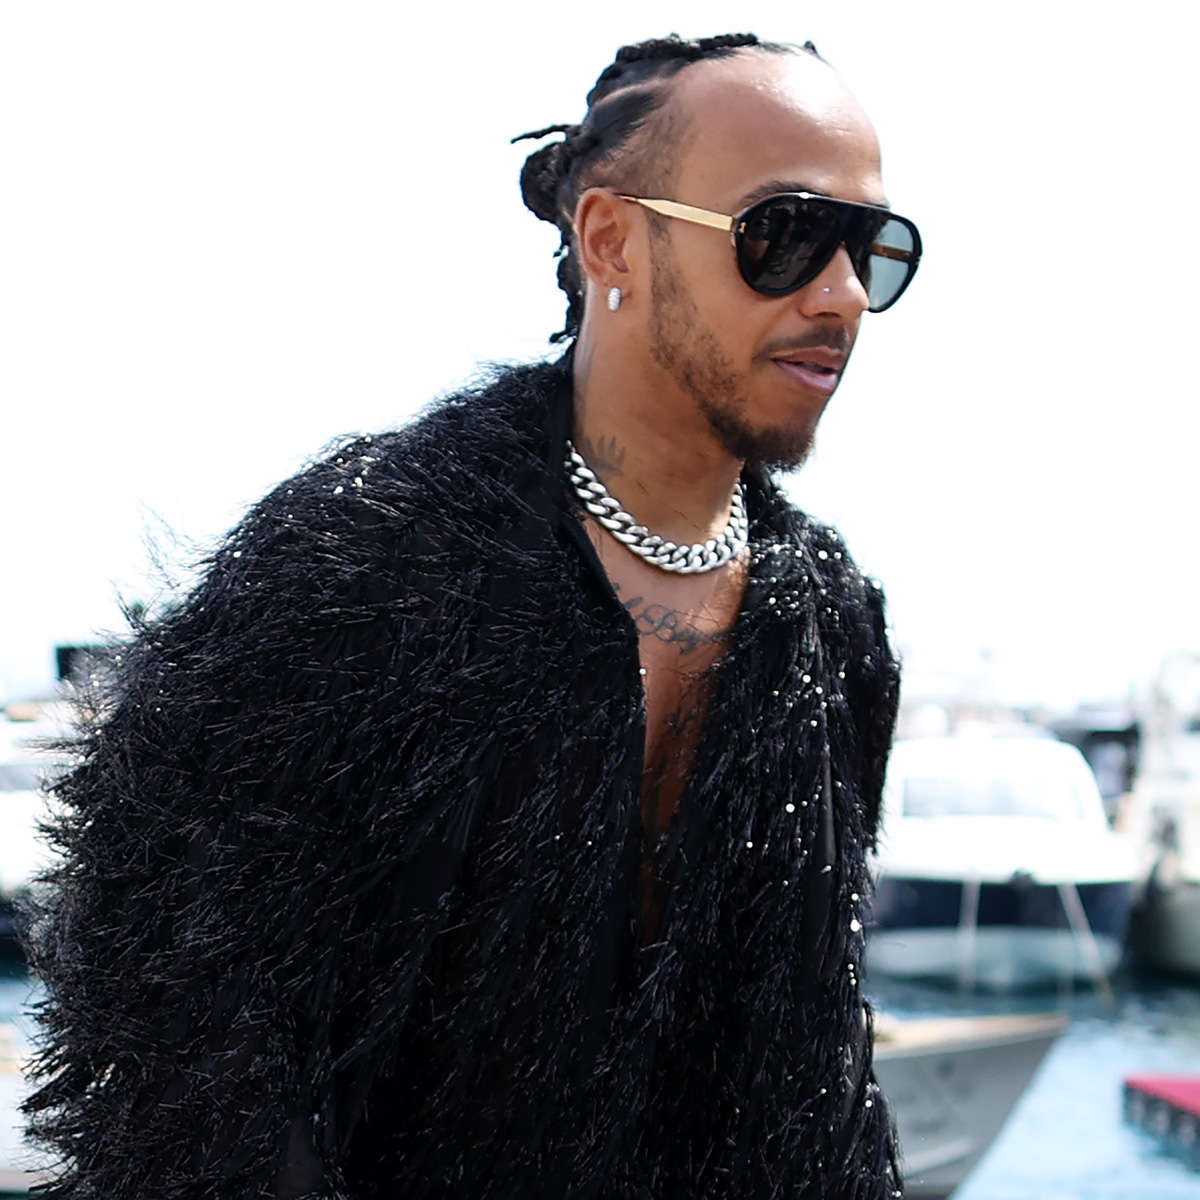 The Best-Dressed Drivers At the Monaco Grand Prix—Period